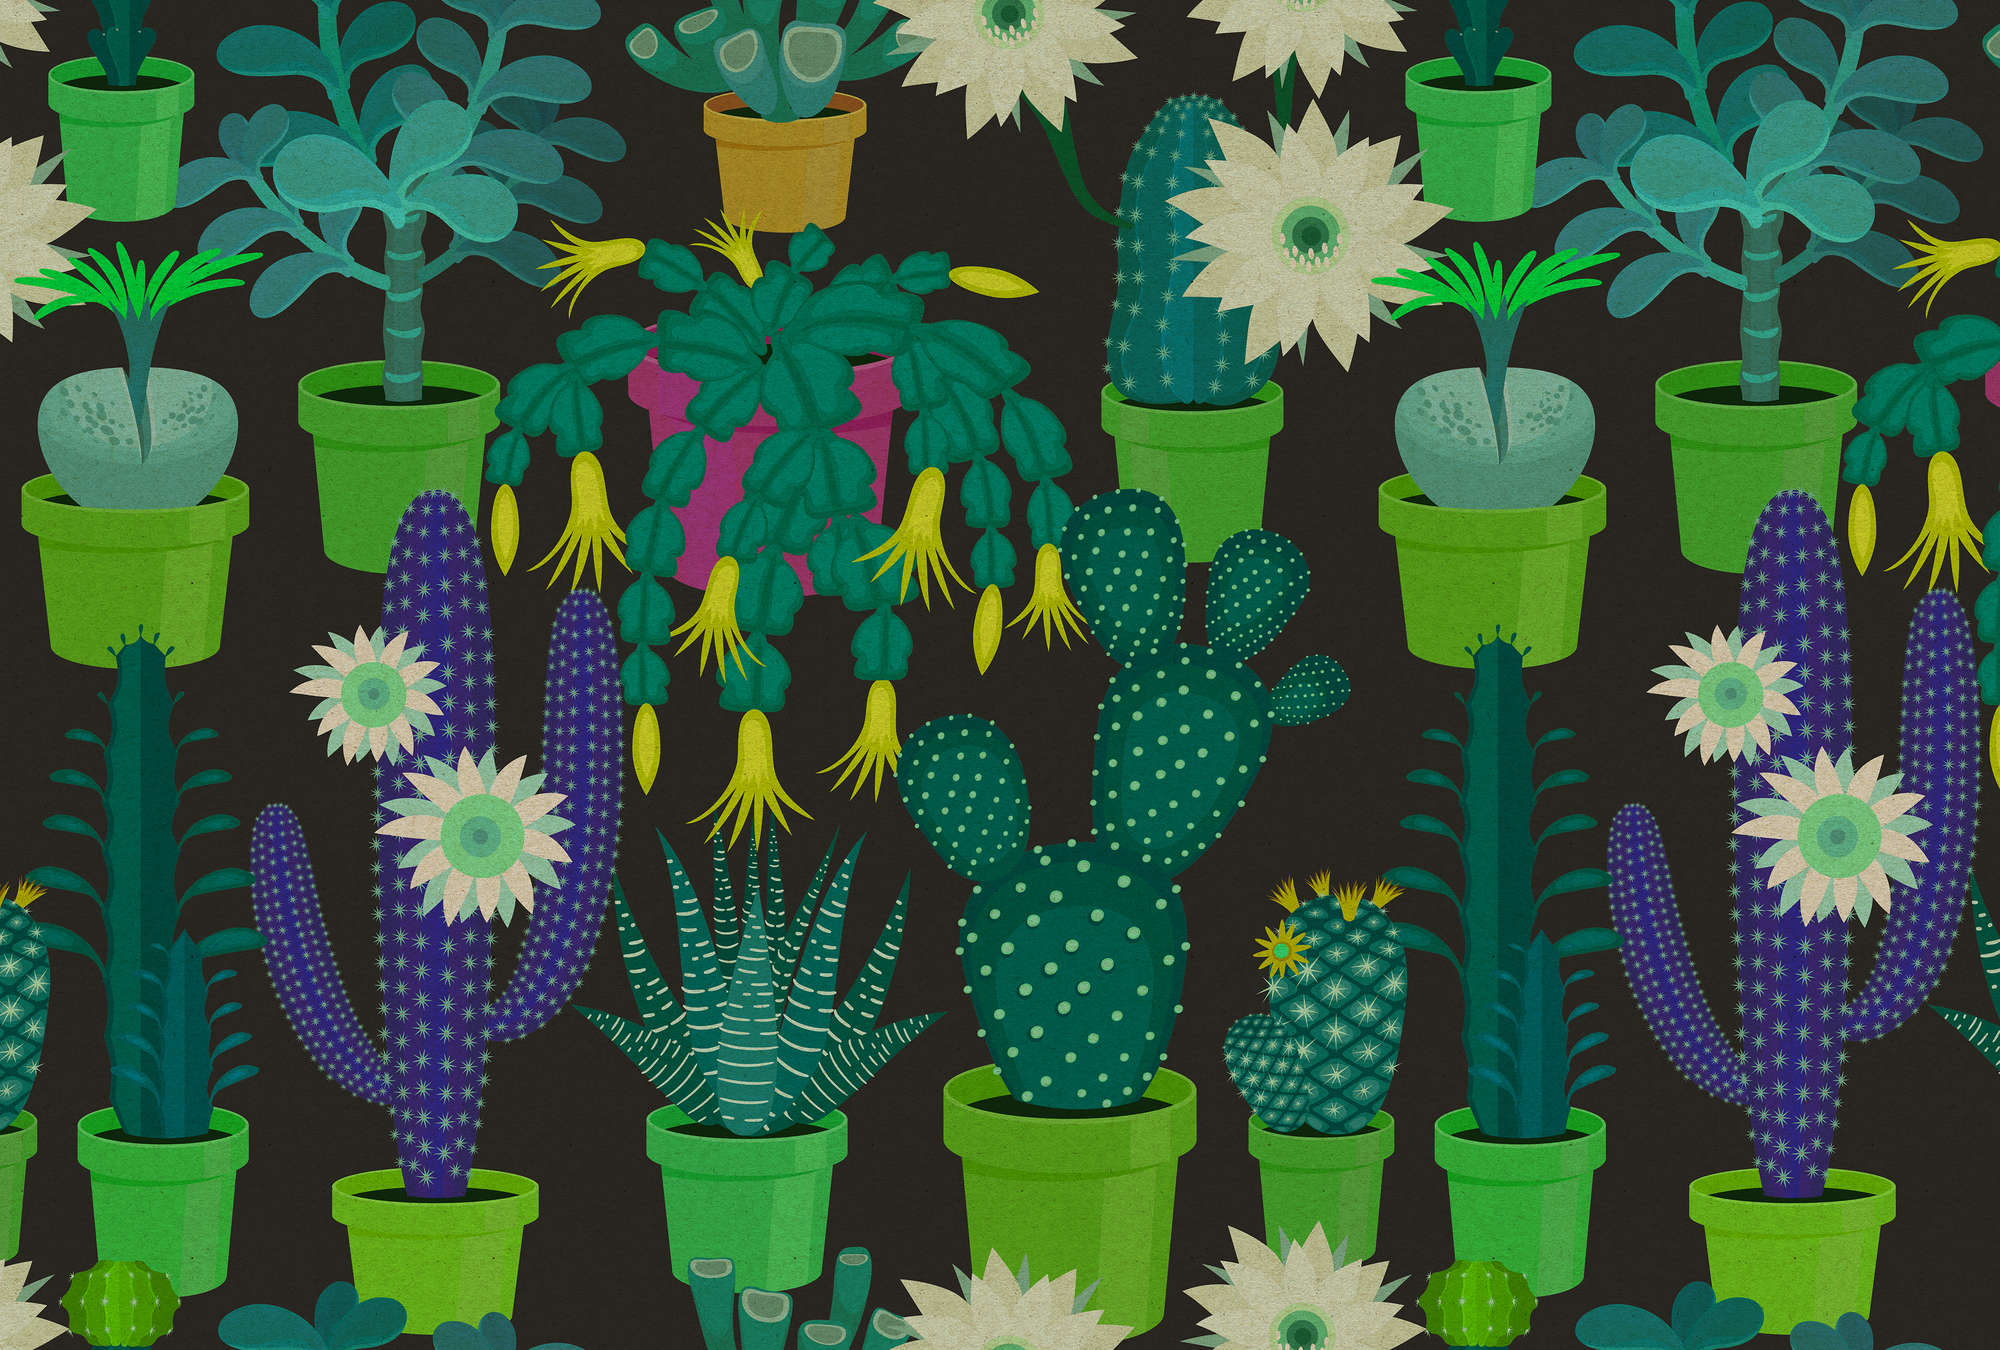             Cactus garden 2 - Photo wallpaper with colourful cacti in comic style in cardboard structure - Green, Black | Premium smooth fleece
        